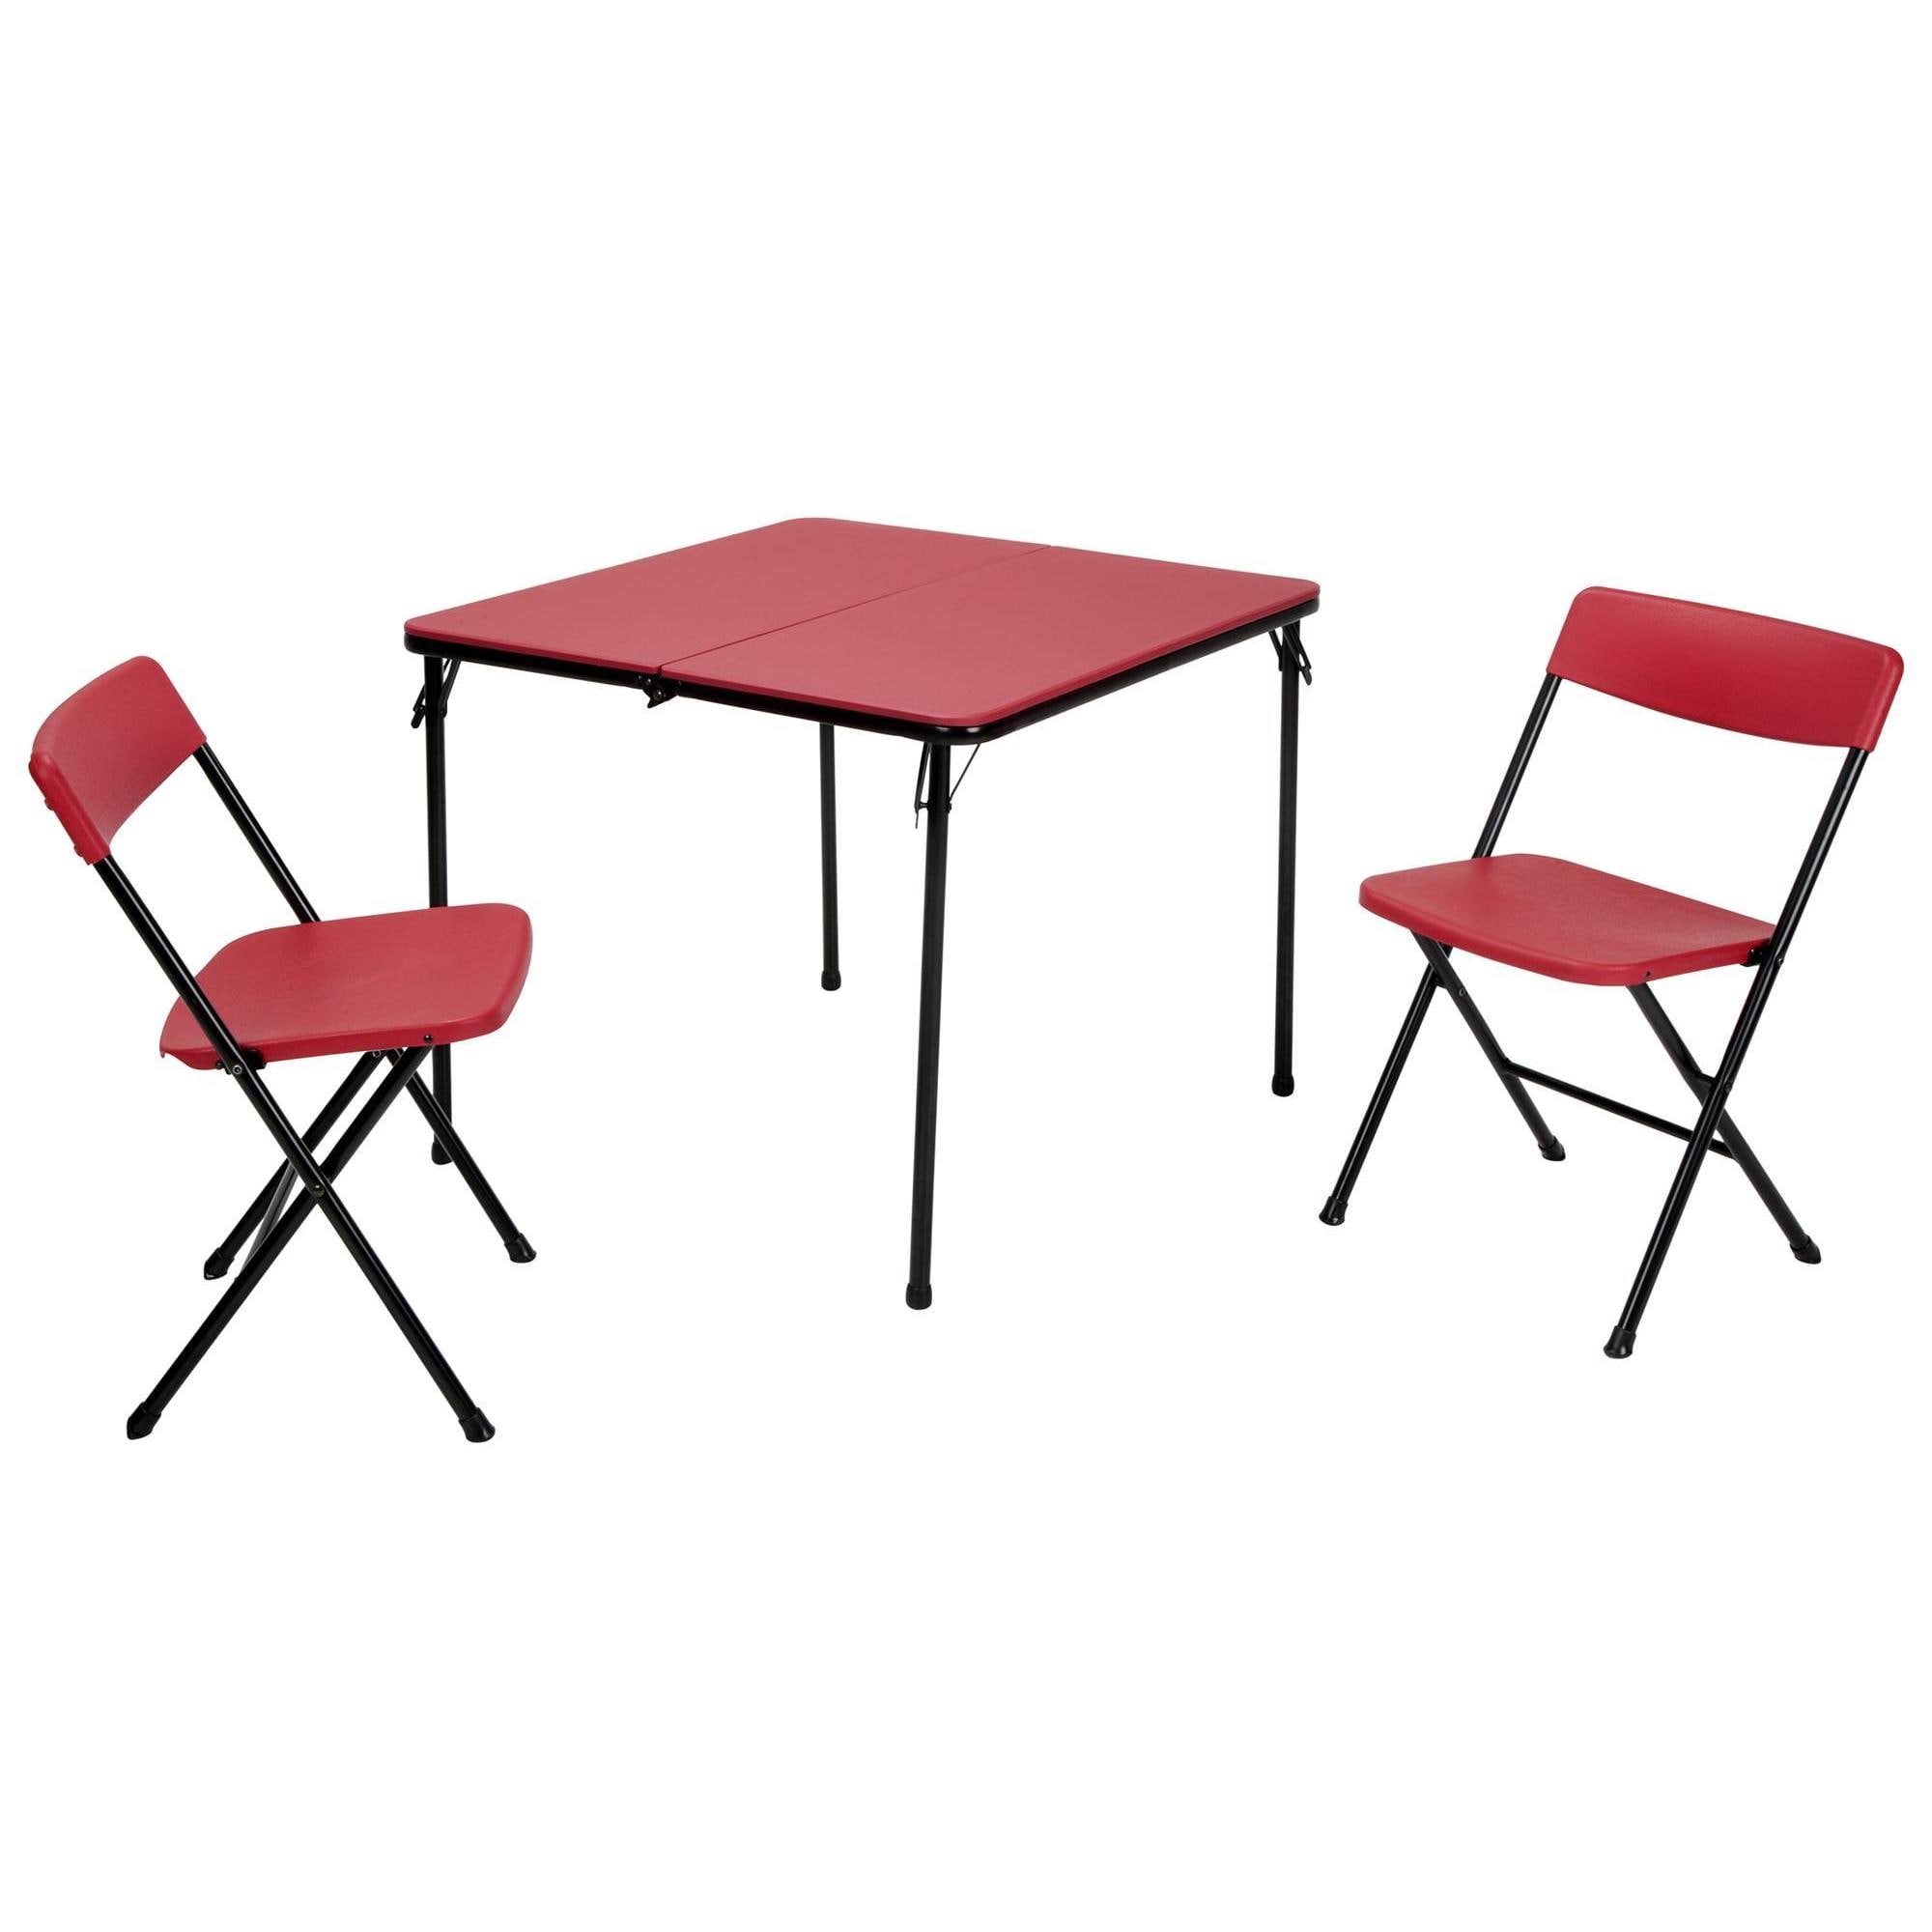 COSCO 3 Piece Indoor Outdoor Center Fold Table and 2 Chairs Tailgate Set Black